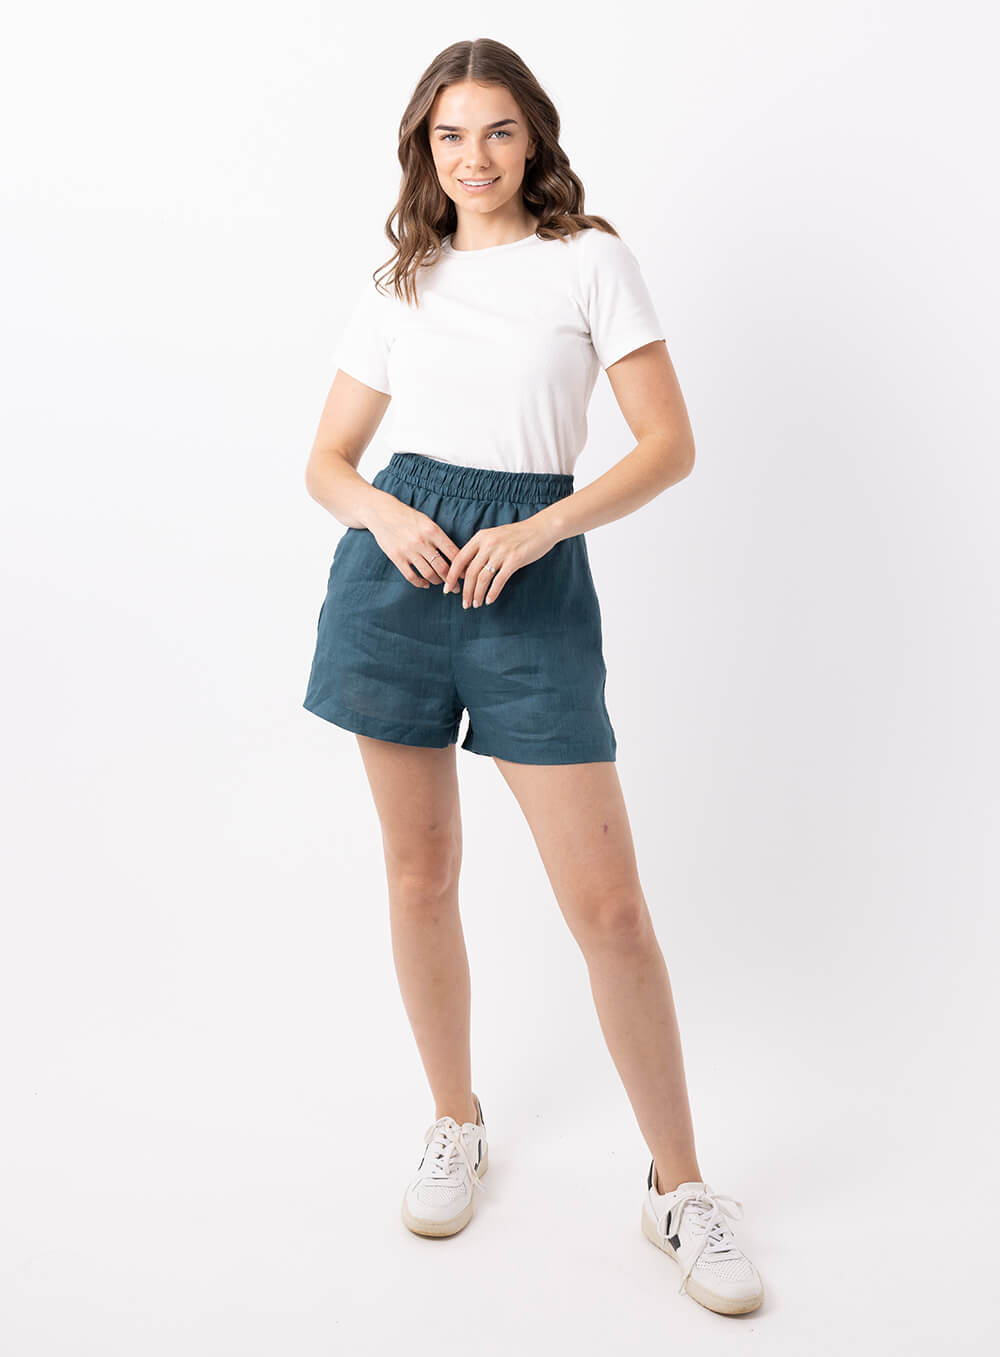 The Ali Linen Short in teal is 100% breathable lien, mid thigh in length with 2 side pockets, no back pockets, elastic waistband and designed to be worn high wiasted and loose fitting